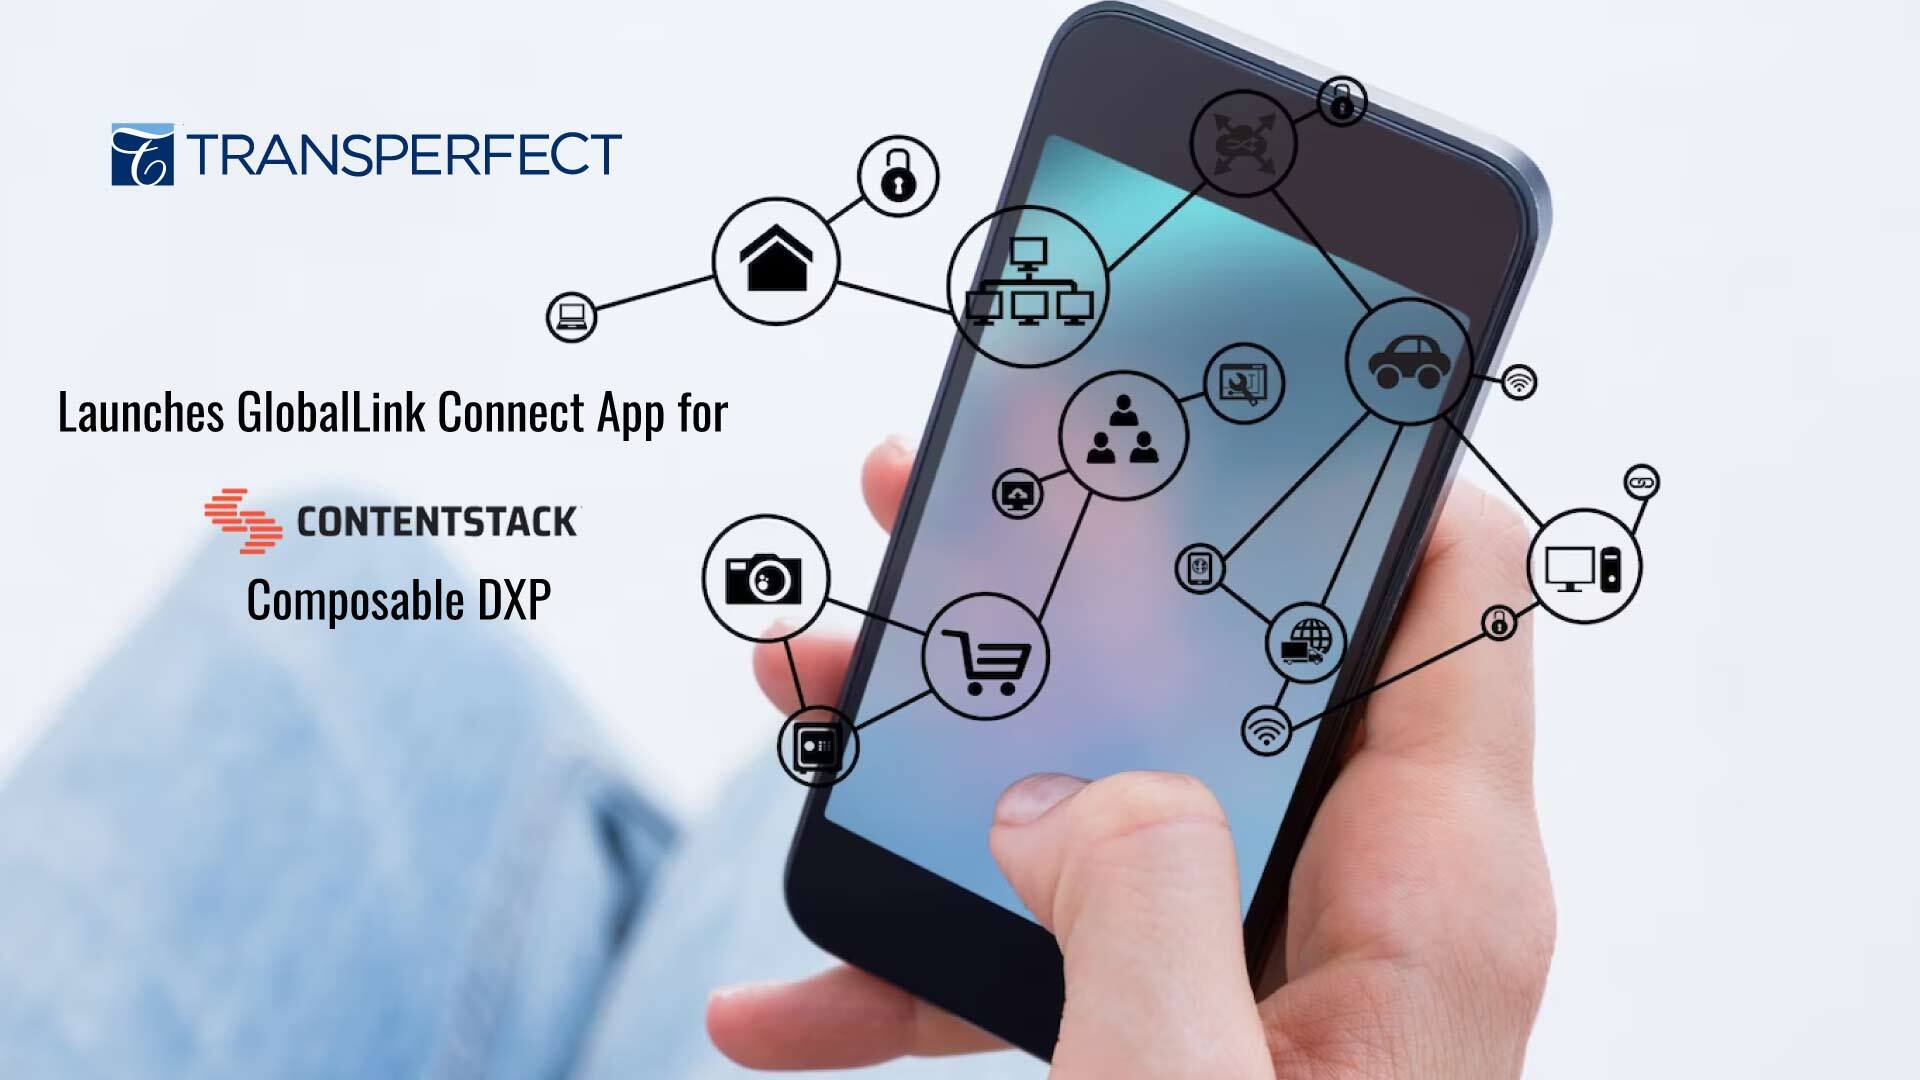 TransPerfect Launches GlobalLink Connect App for Contentstack’s Composable Digital Experience Platform